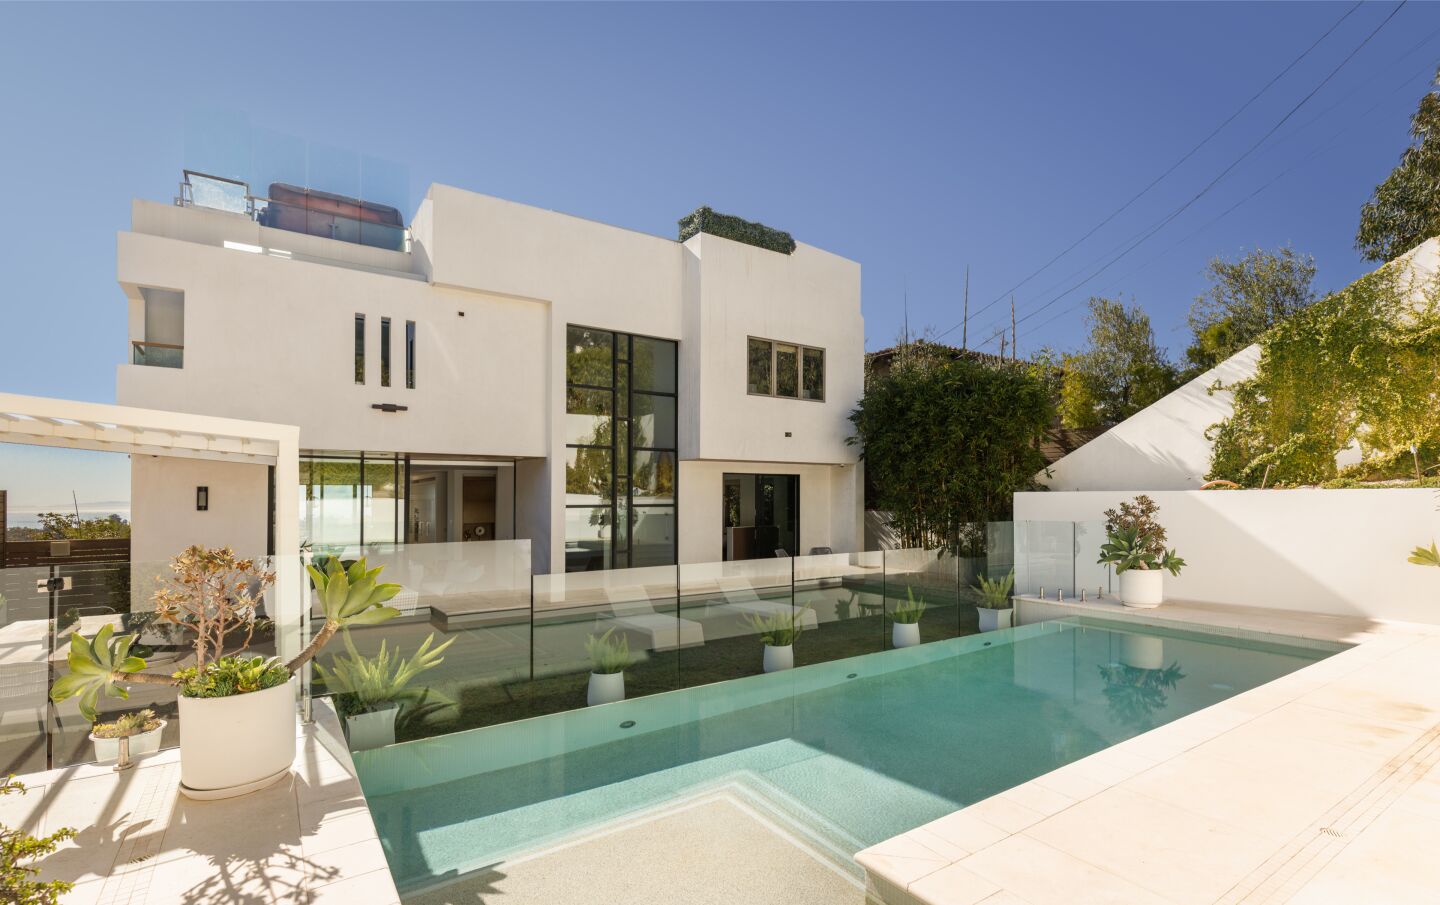 Modern and boxy, the three-story home has a pool next to it